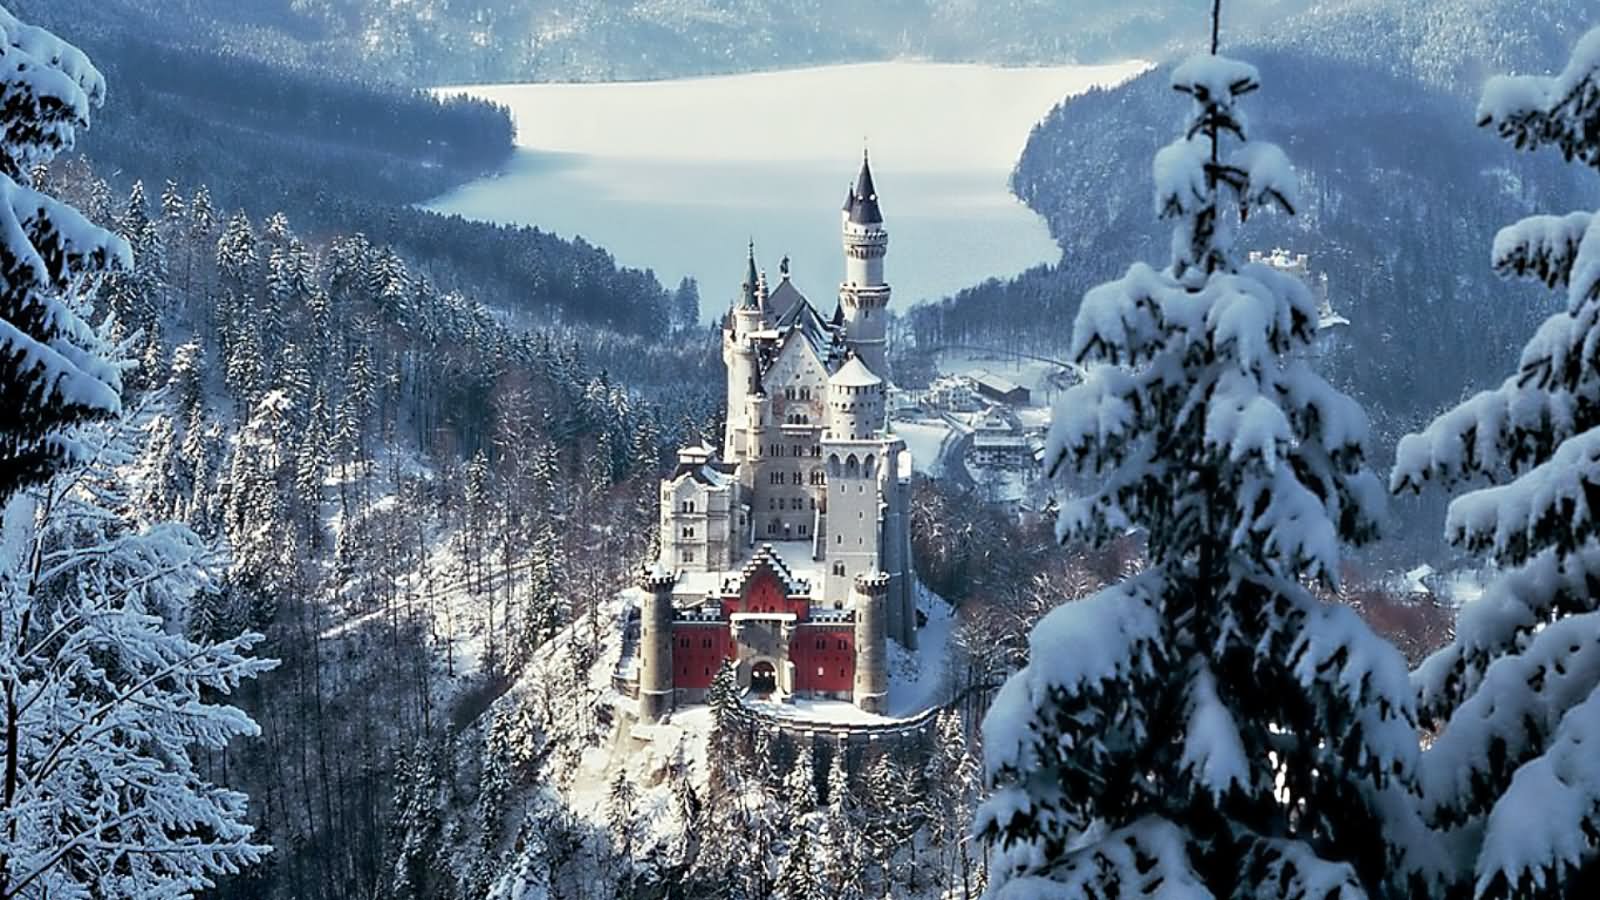 Aerial View Of The Neuschwanstein Castle Covered With Snow During Winter